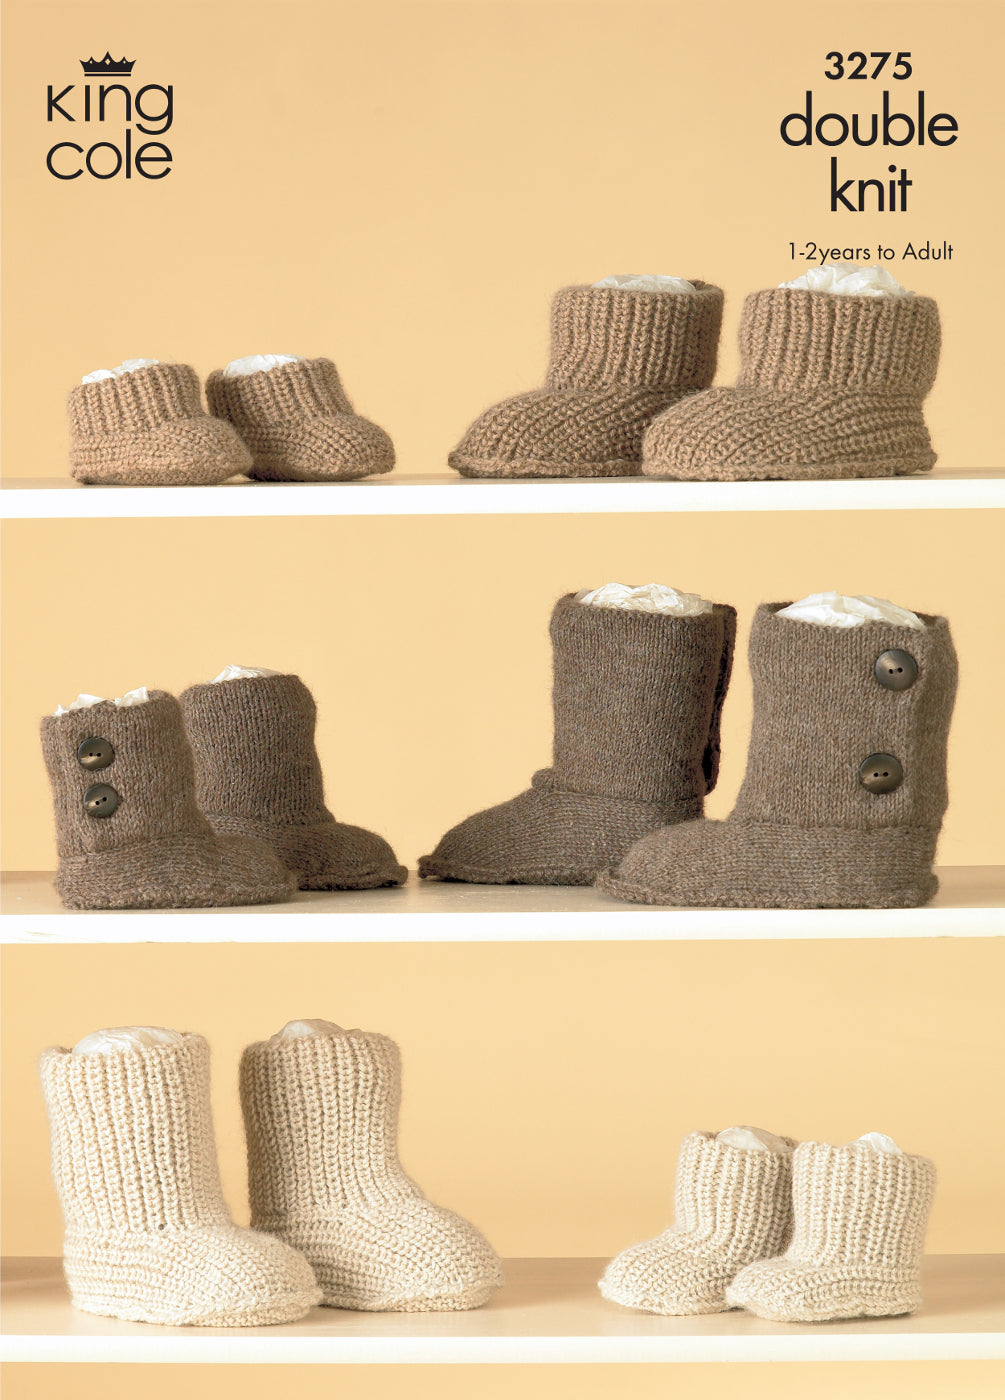 King Cole Double Knitting Pattern - 3275 Knitted Hug Boot Slippers